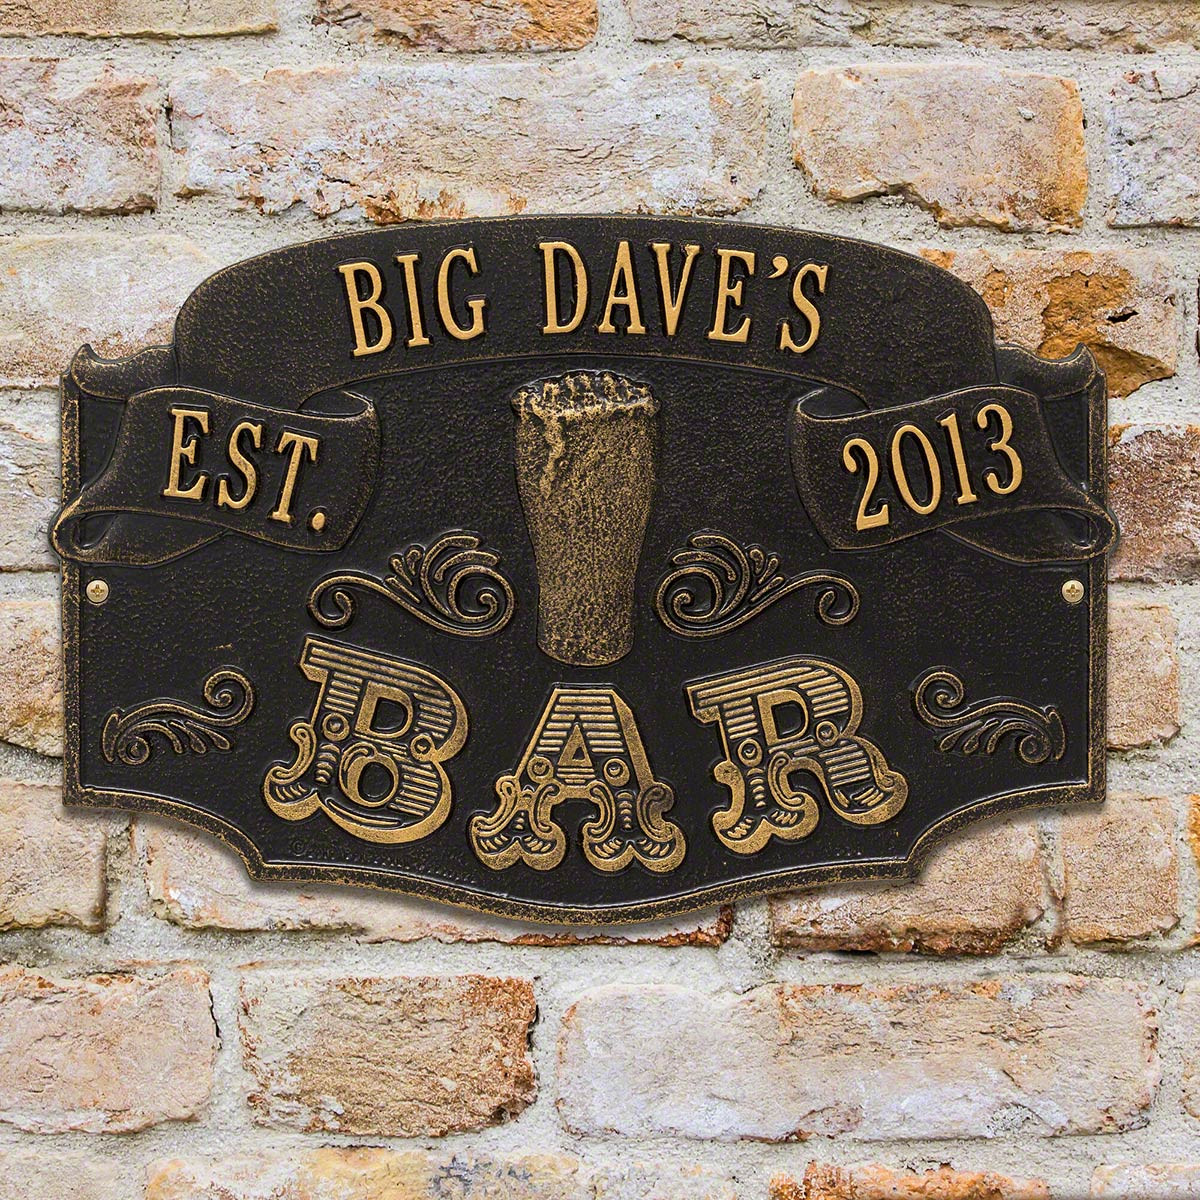 Some personalized house plaques just have a boring old address, so make your home the hot spot of the neighborhood with this cool bar sign! These metal signs are great on exterior walls or inside, solidly built from rust-free aluminum in one of 7 classic #bar